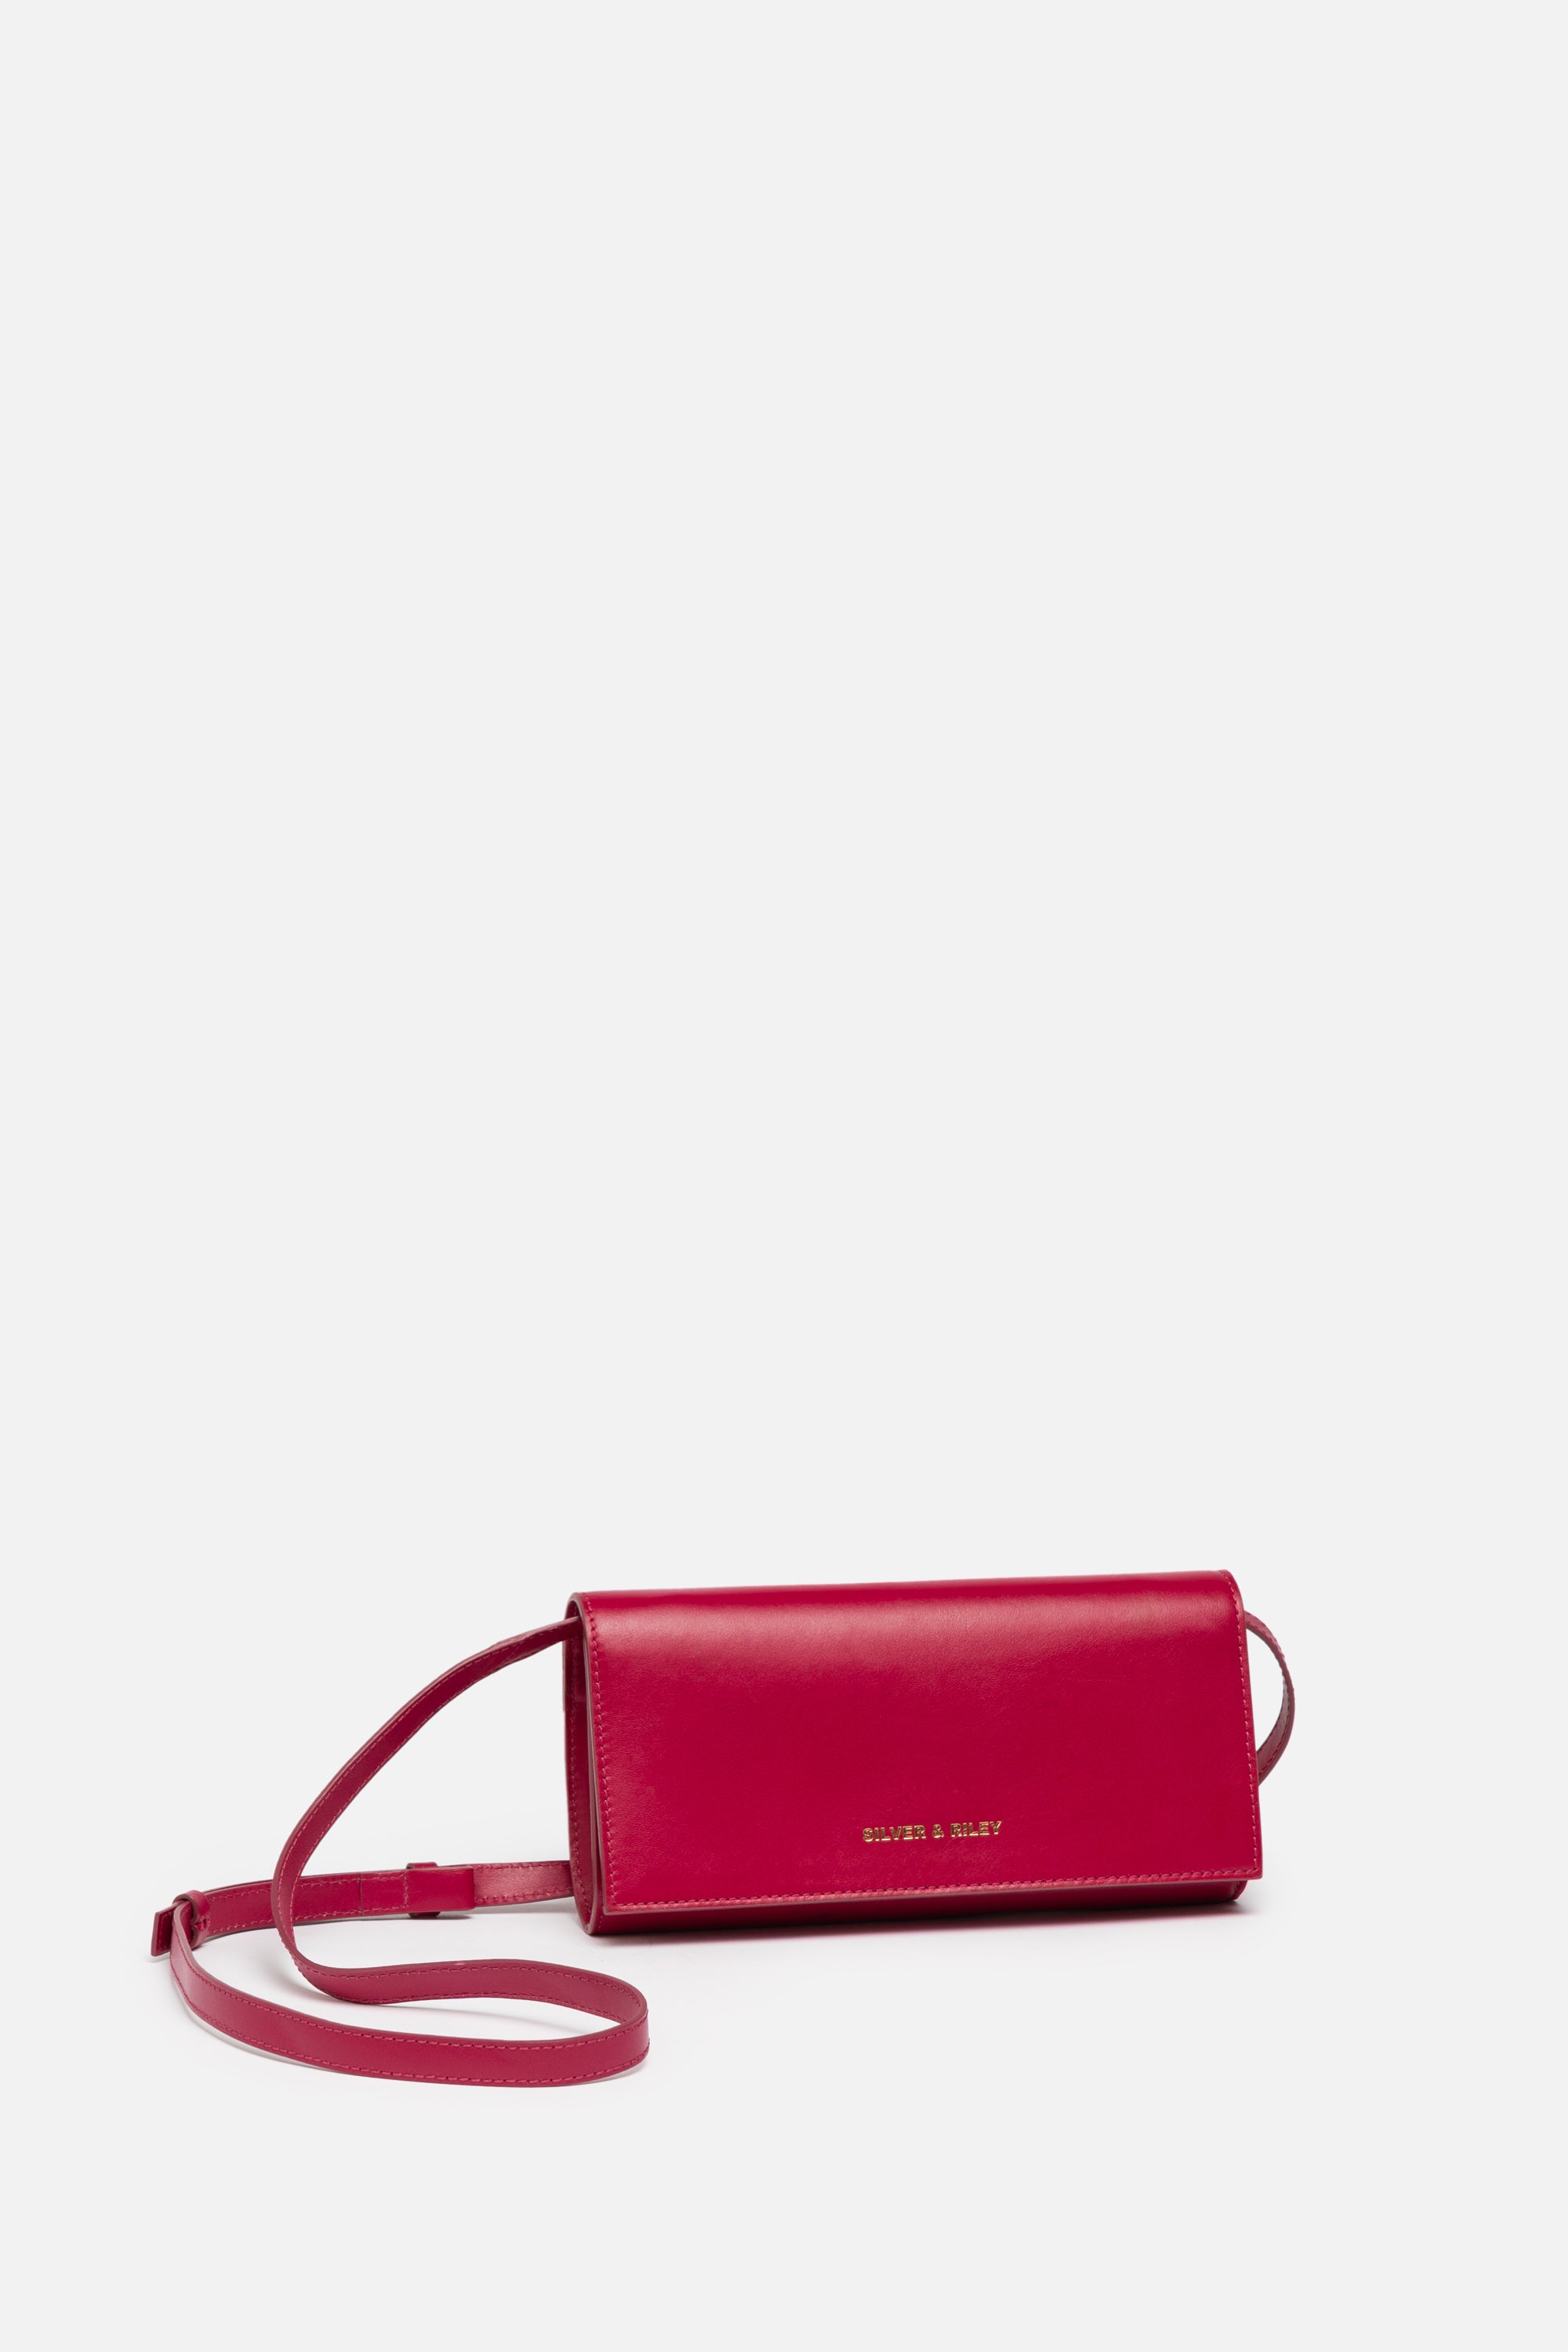 Silver & Riley Going places Leather Belt Bag in Maroon